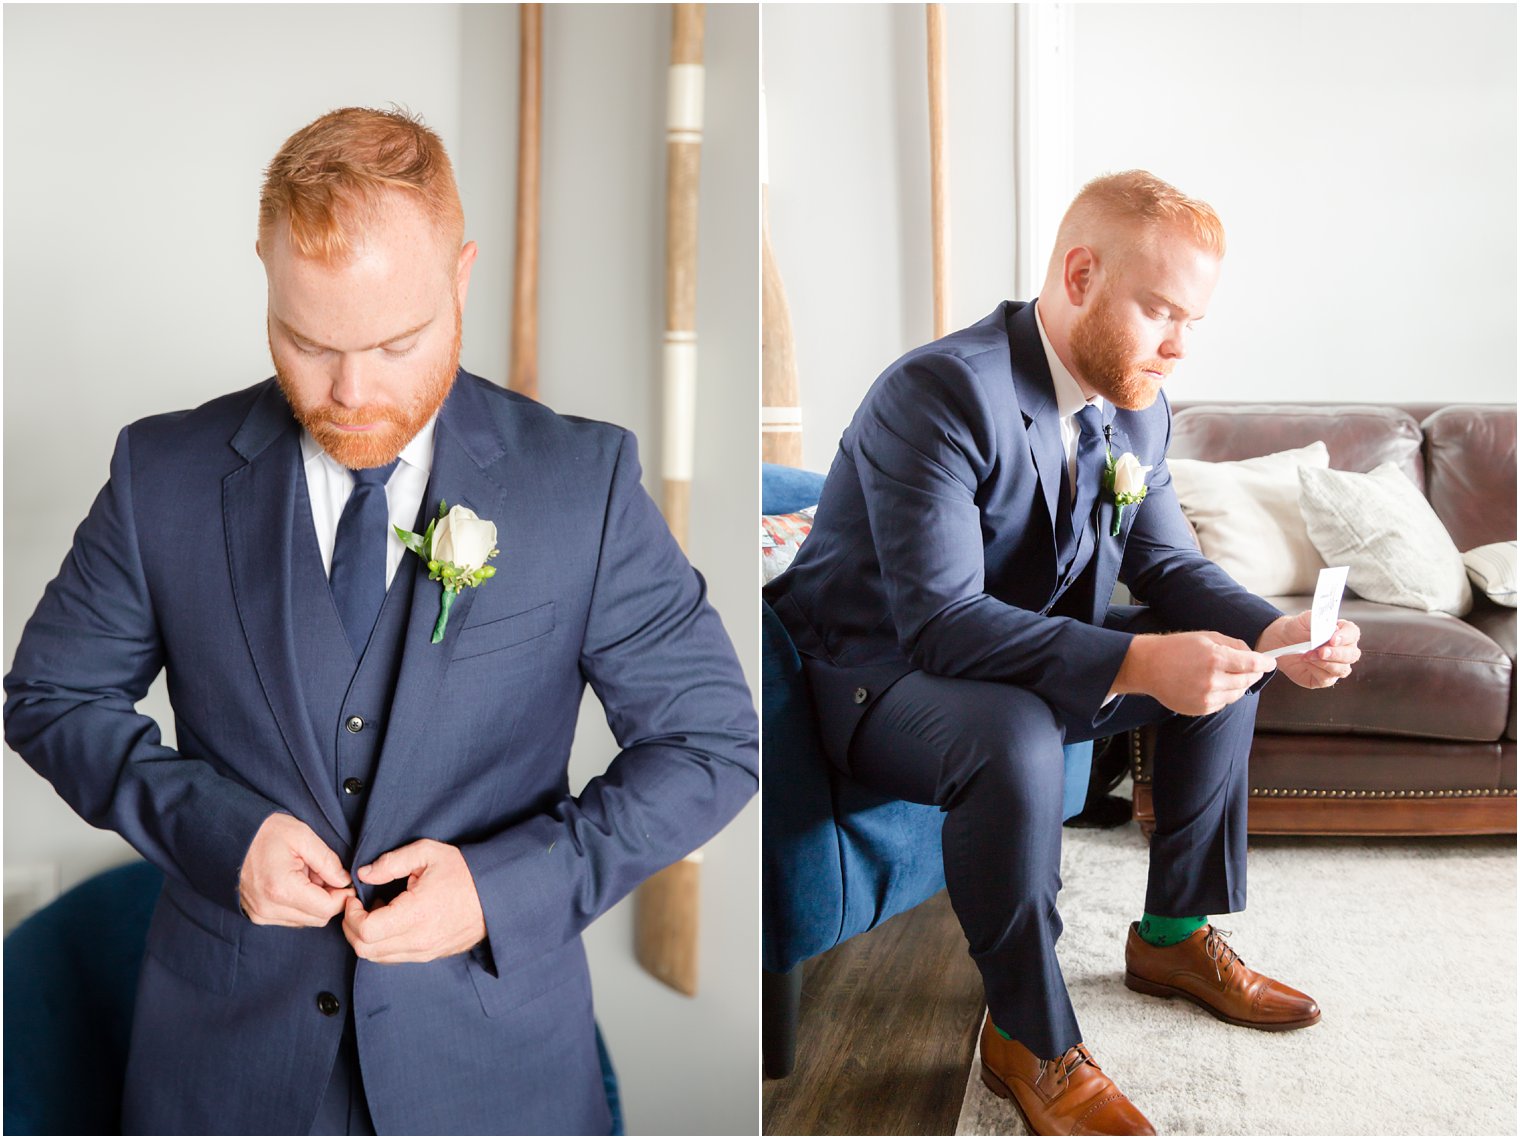 classic groom attire navy suit for Lake Mohawk Country Club wedding day photographed by Idalia Photography